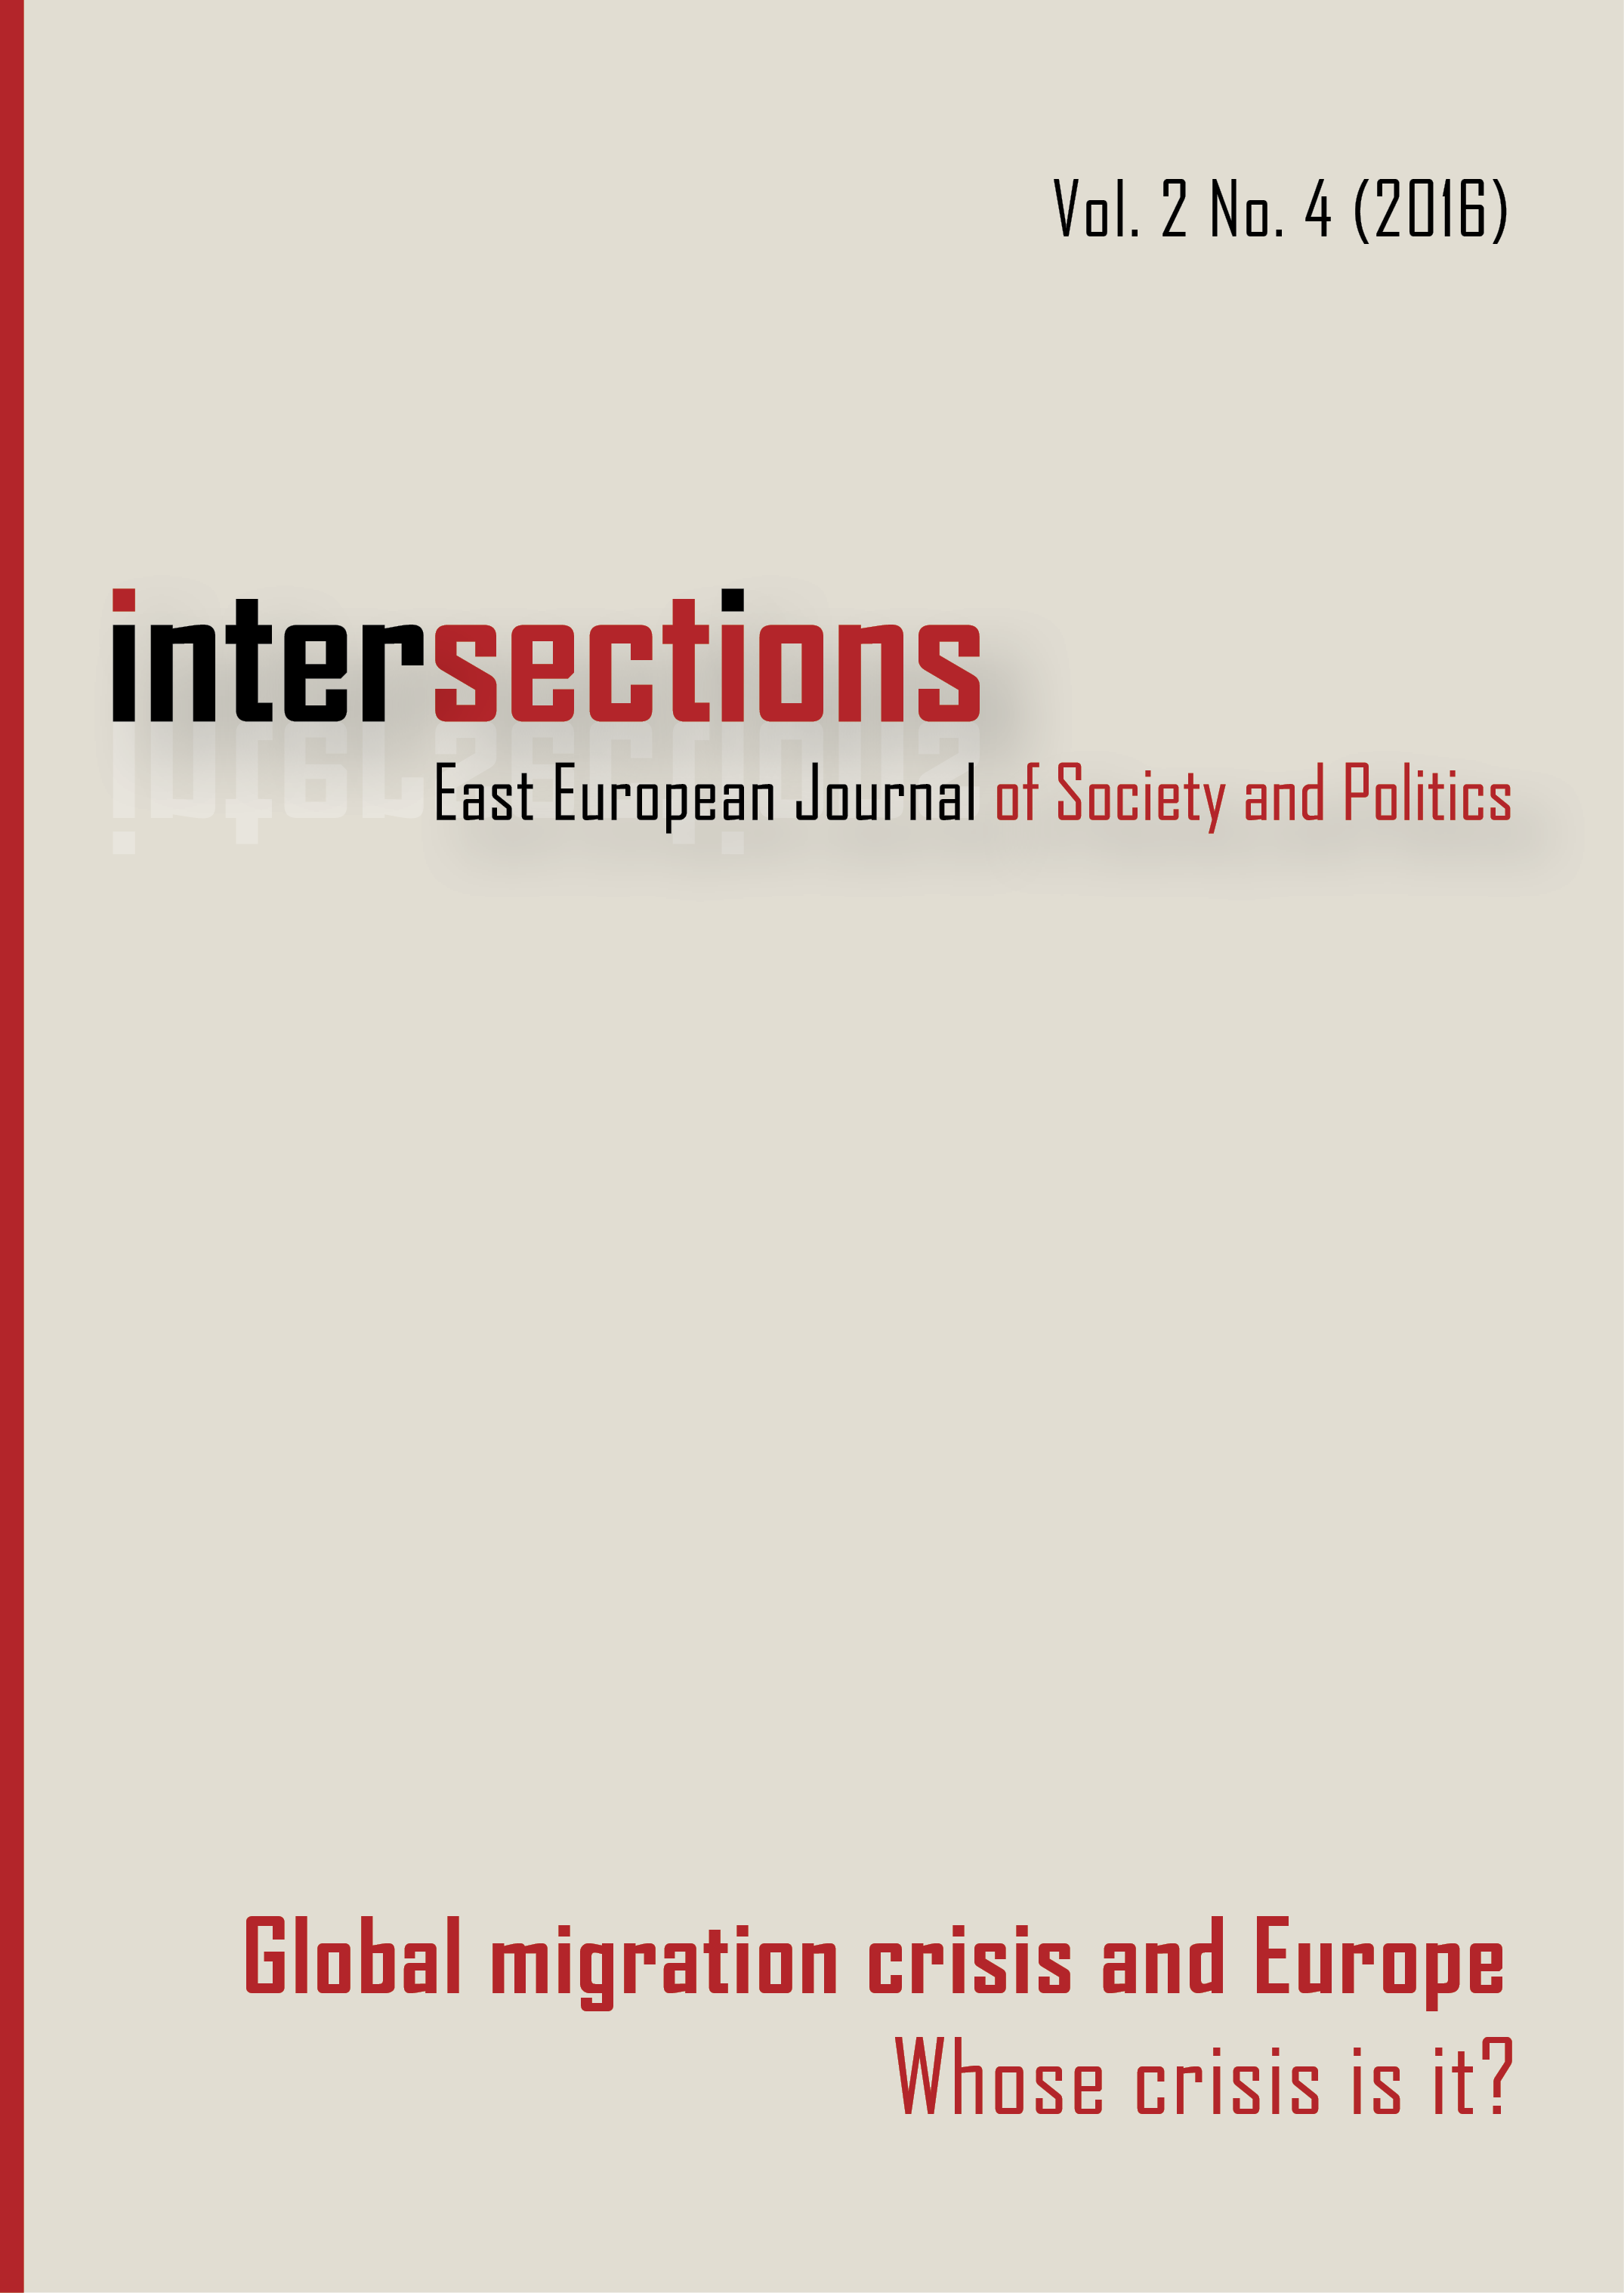 					View Vol. 2 No. 4 (2016): Global Migration Crisis and Europe: Whose Crisis is it?
				